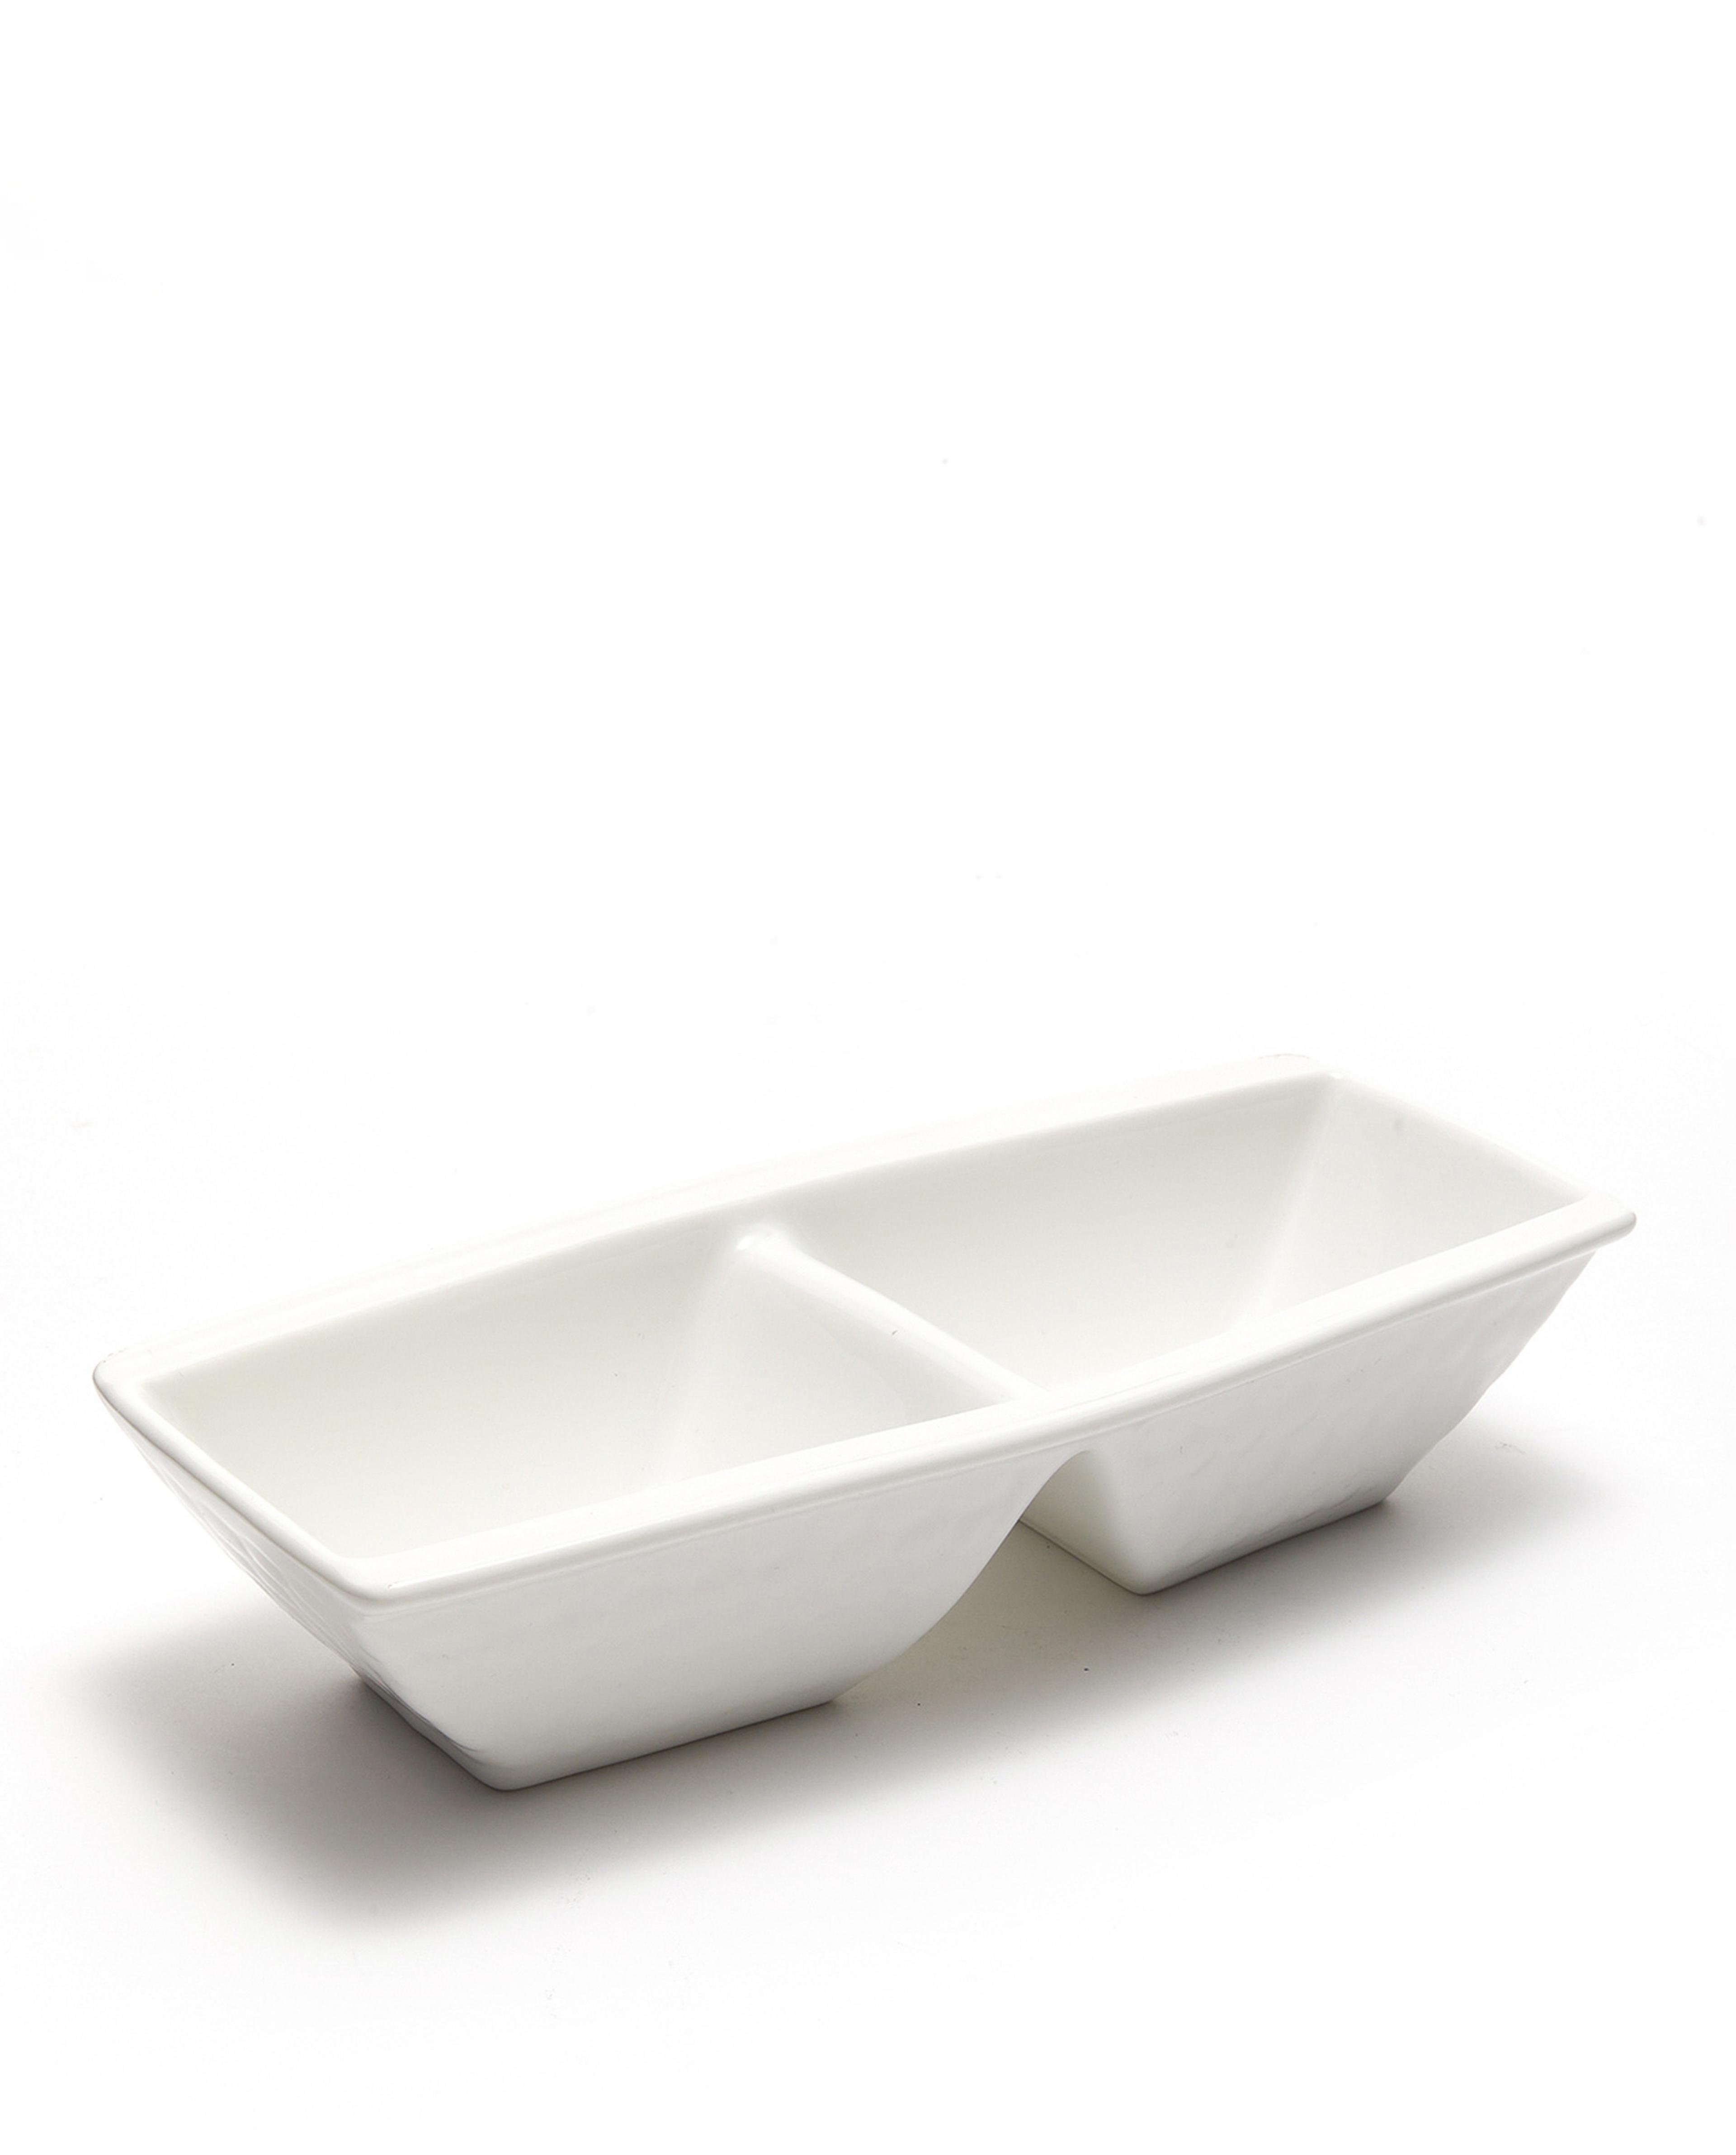 Dipping Sauce Tray